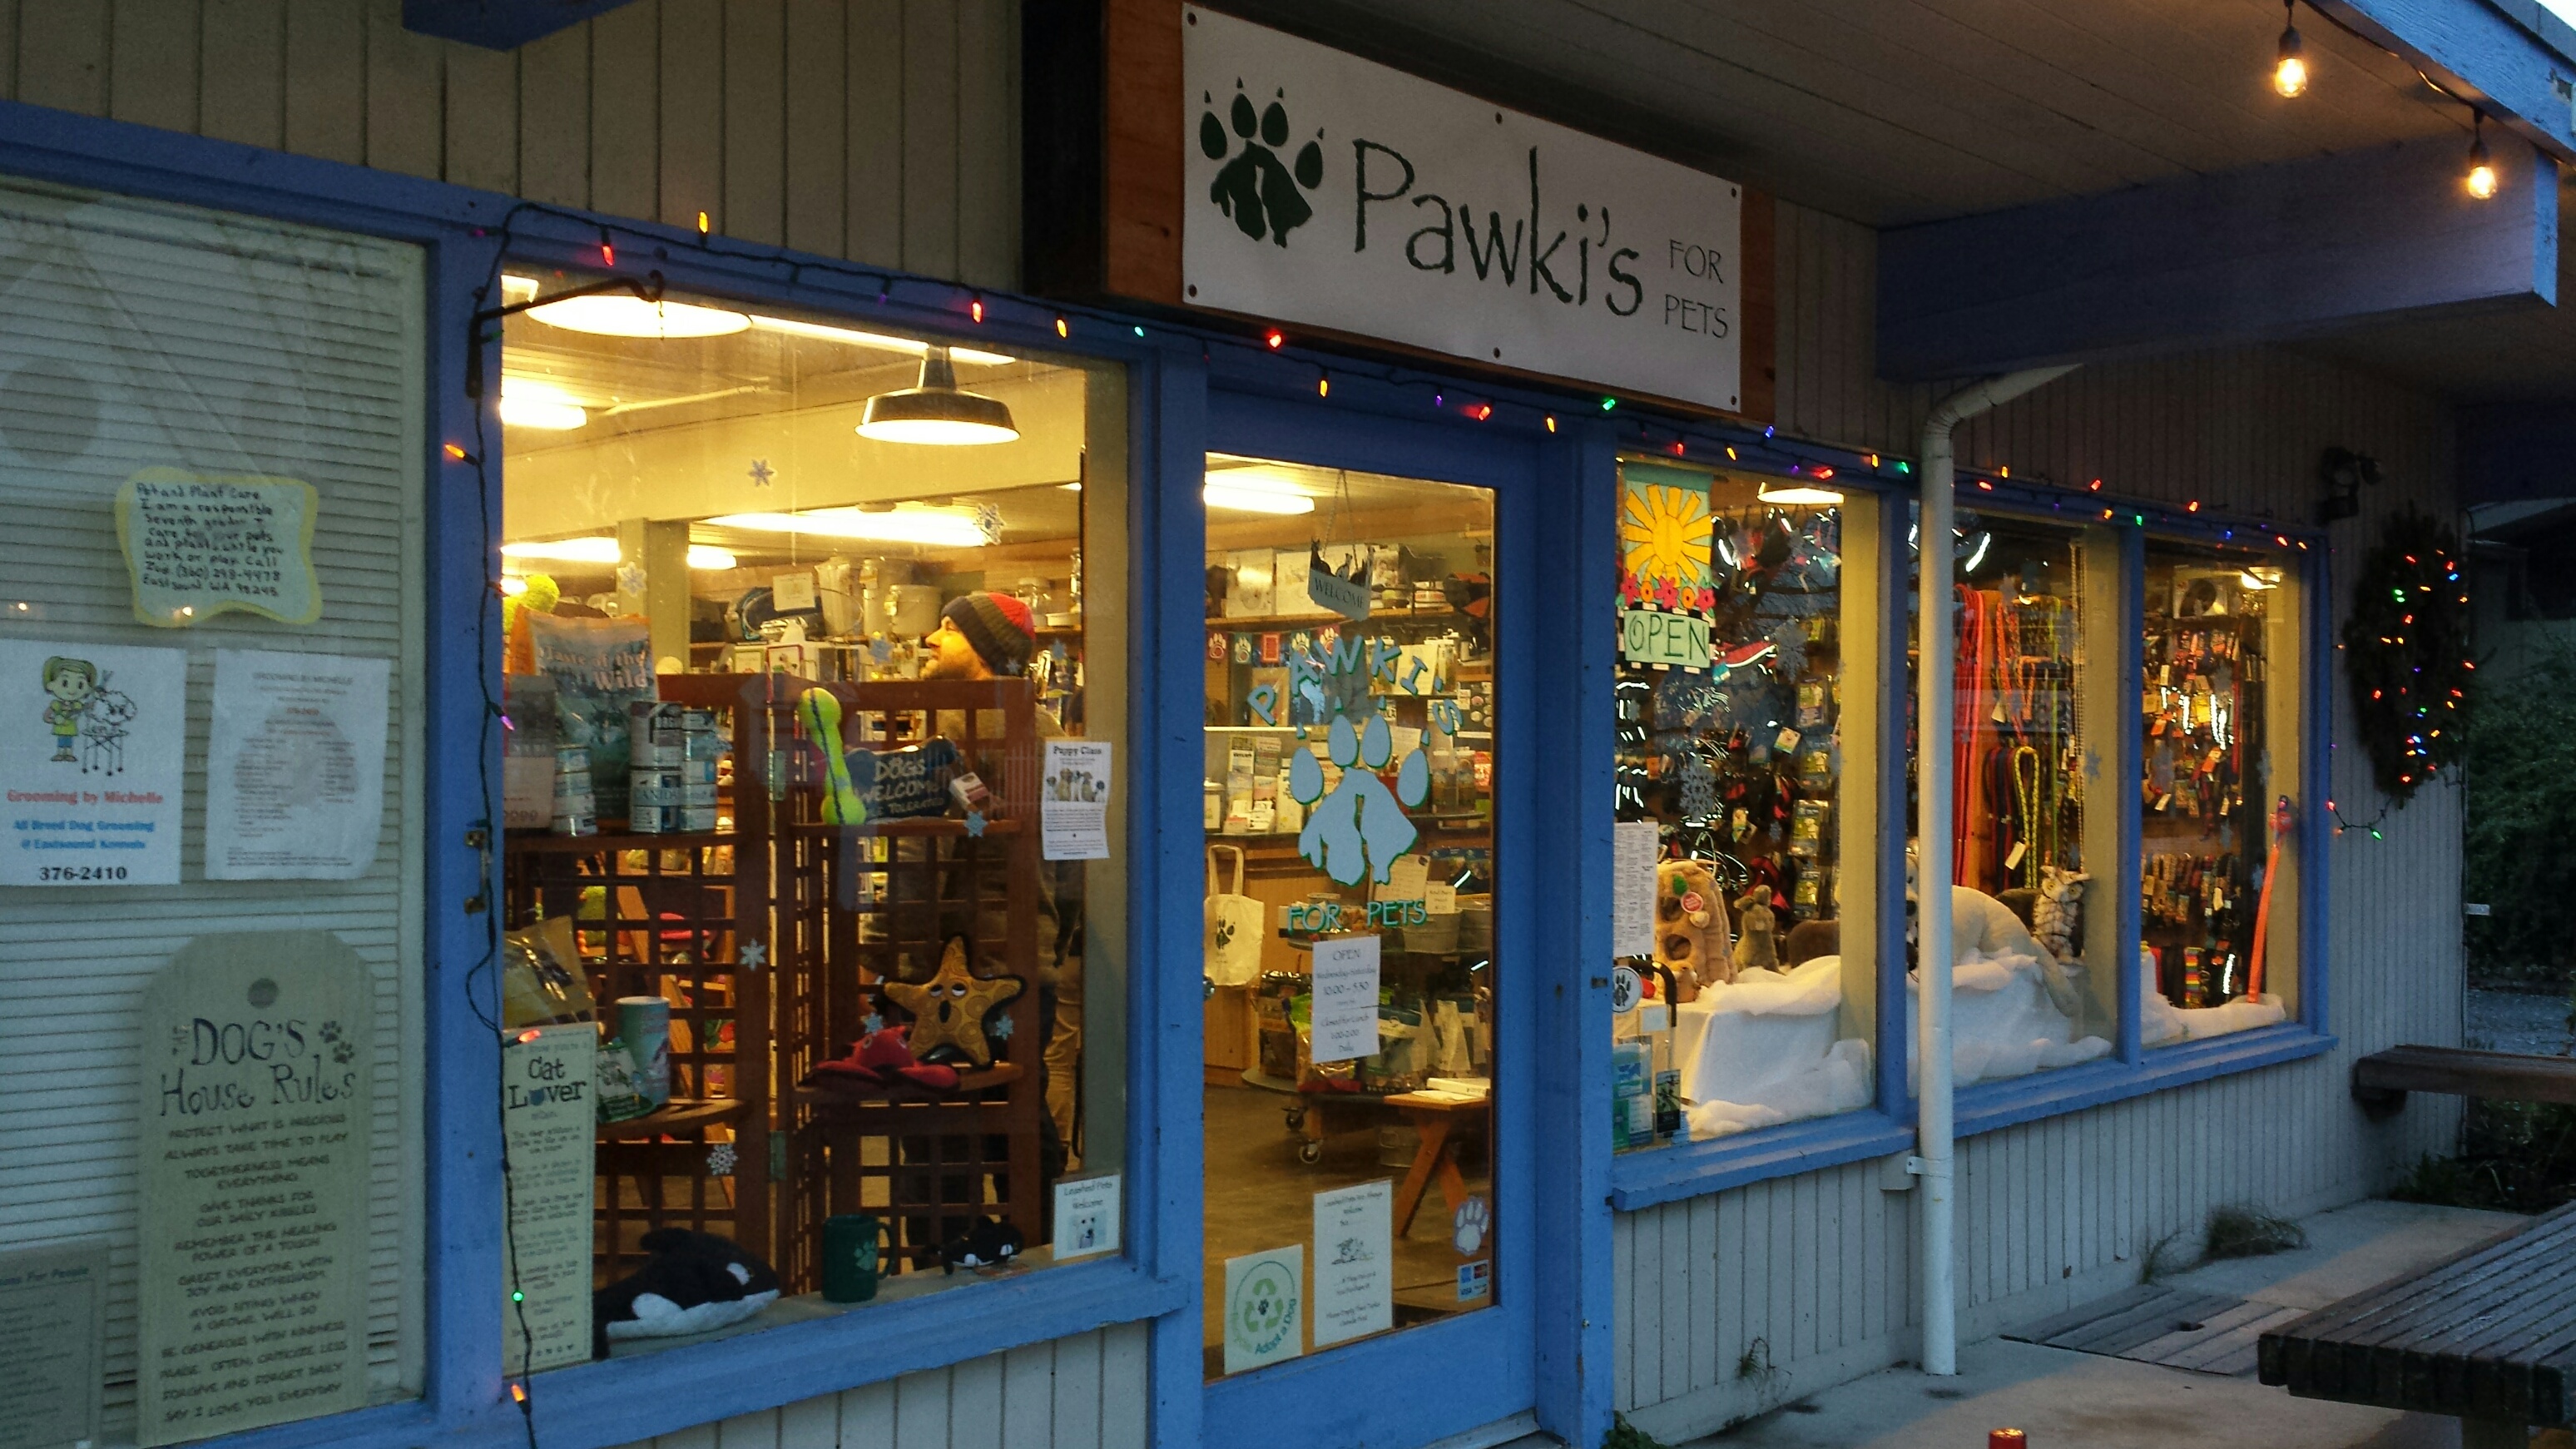 Pawki's for pets